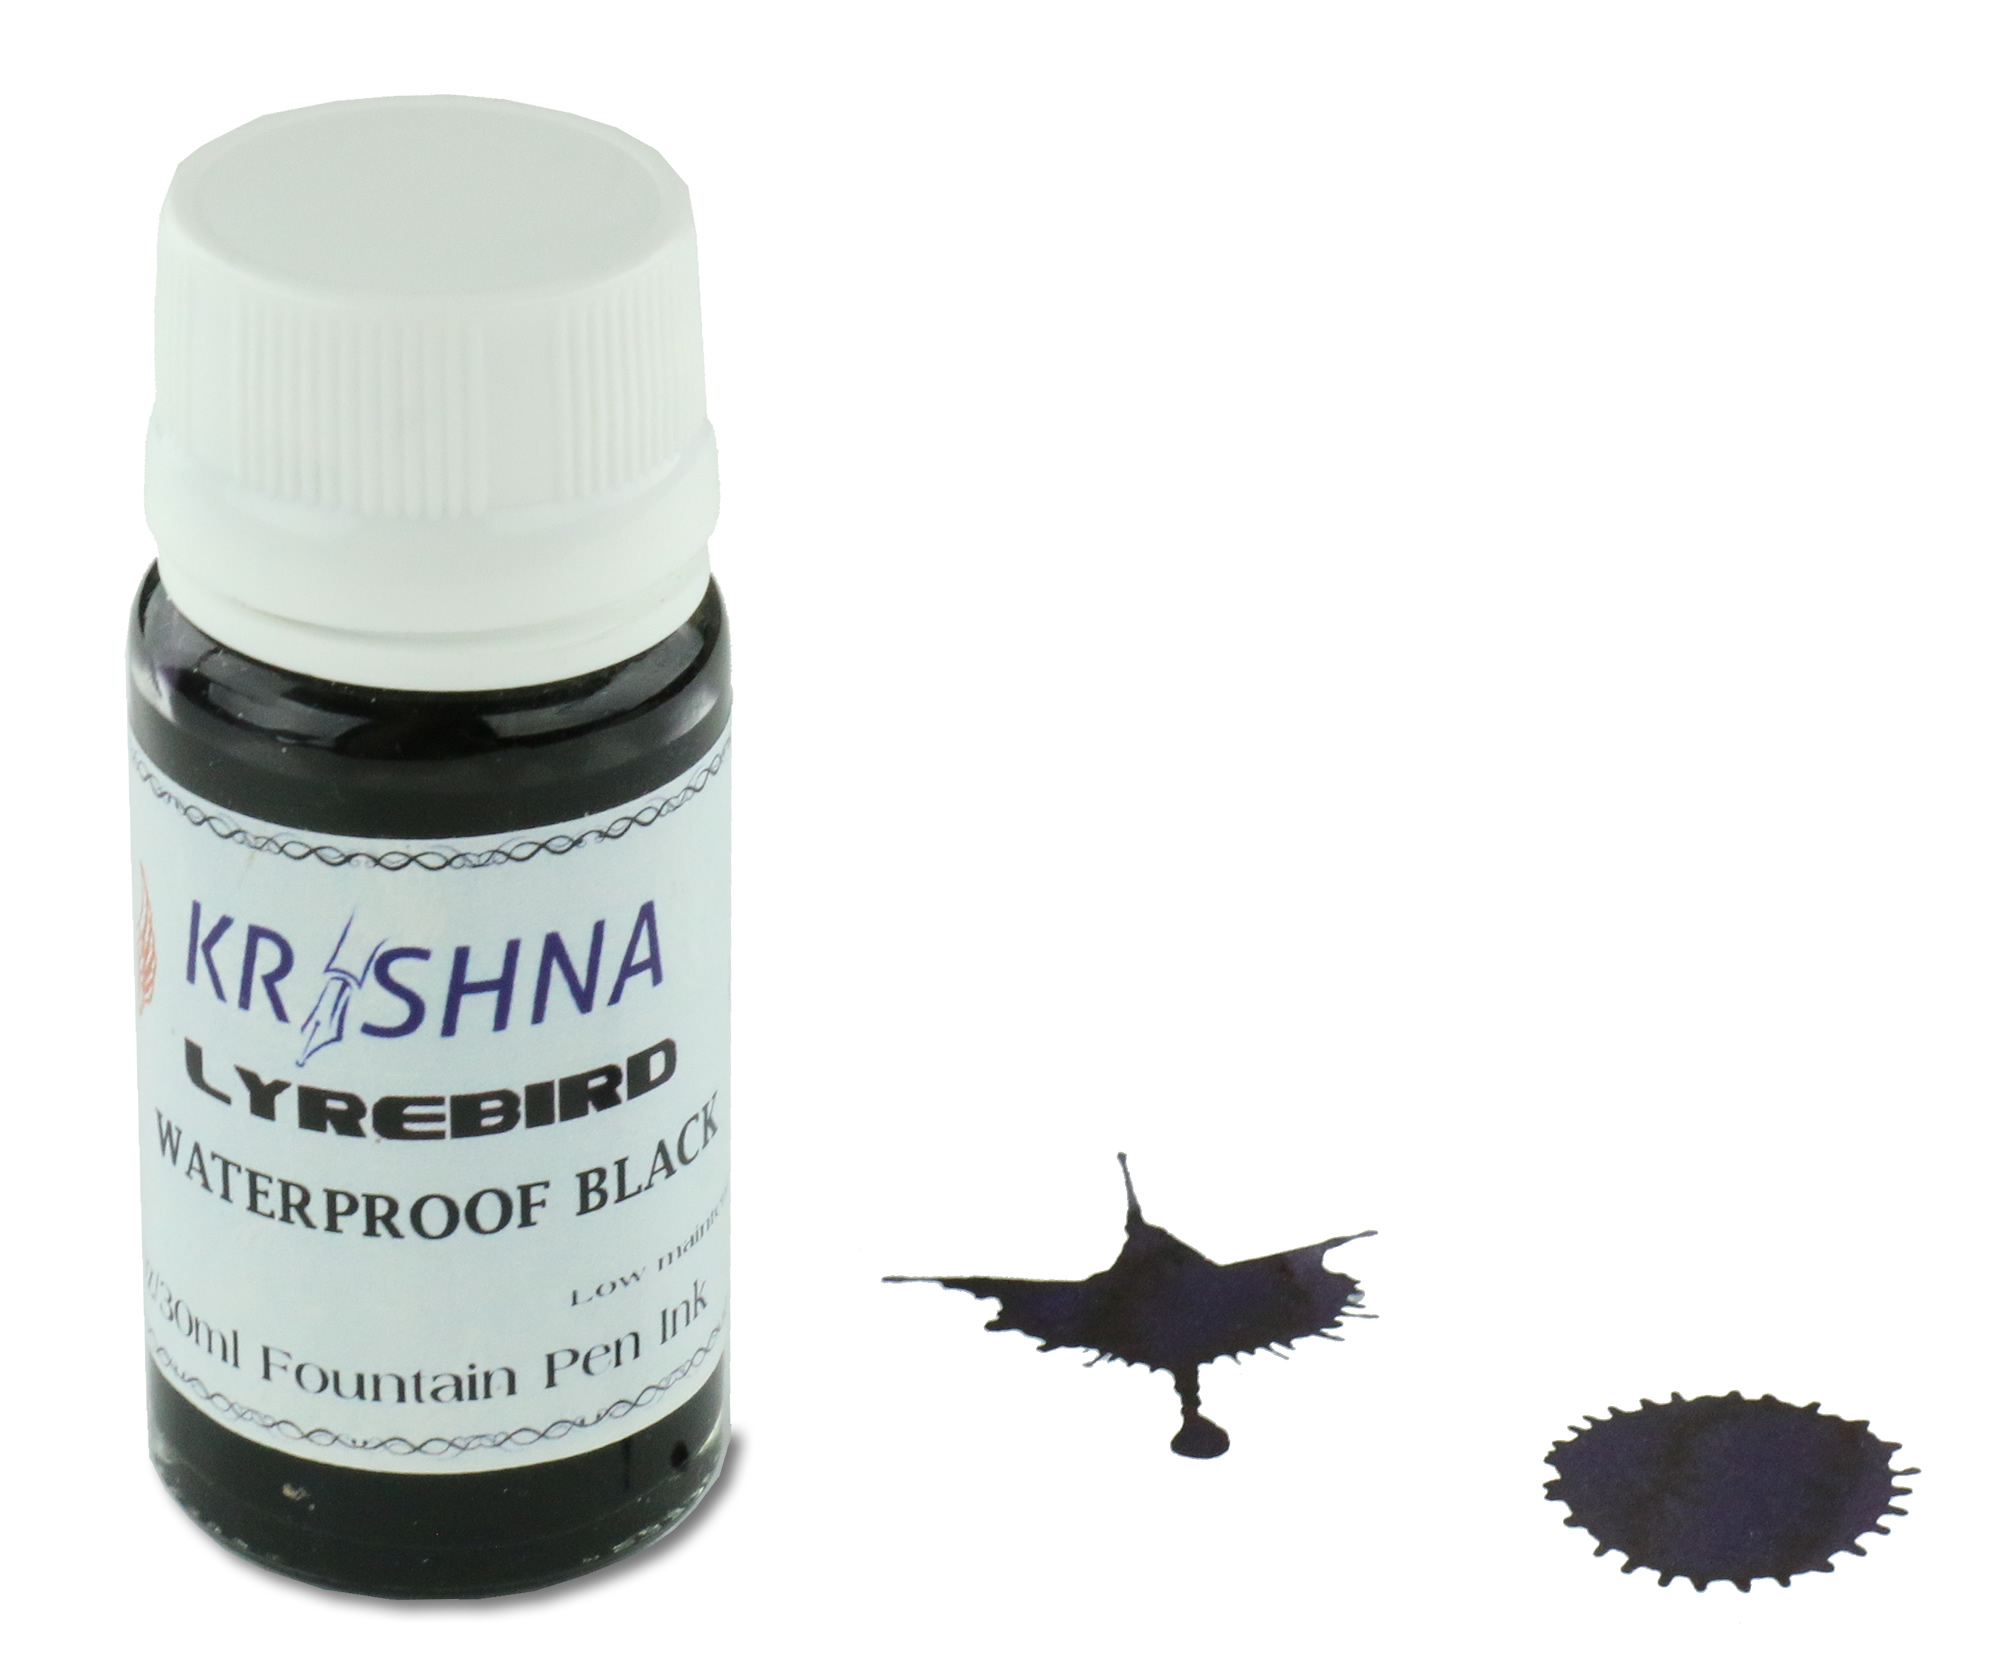 World Famous Ink Indian Ink 30ml